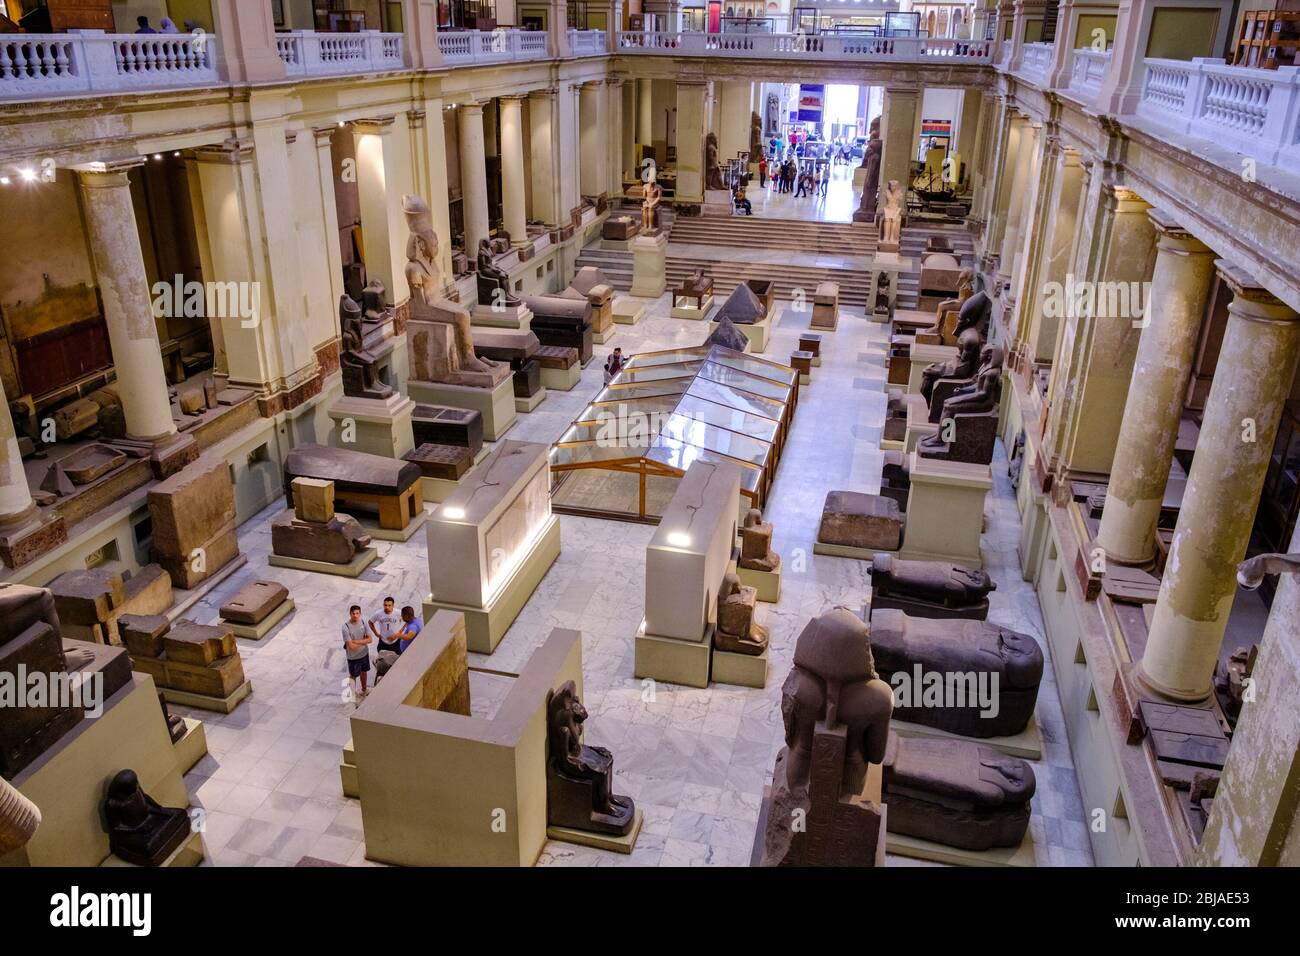 Cairo / Egypt - May 25, 2019: Interior of the Museum of Egyptian Antiquities (Egyptian Museum) which houses the world's largest collection of ancient Stock Photo